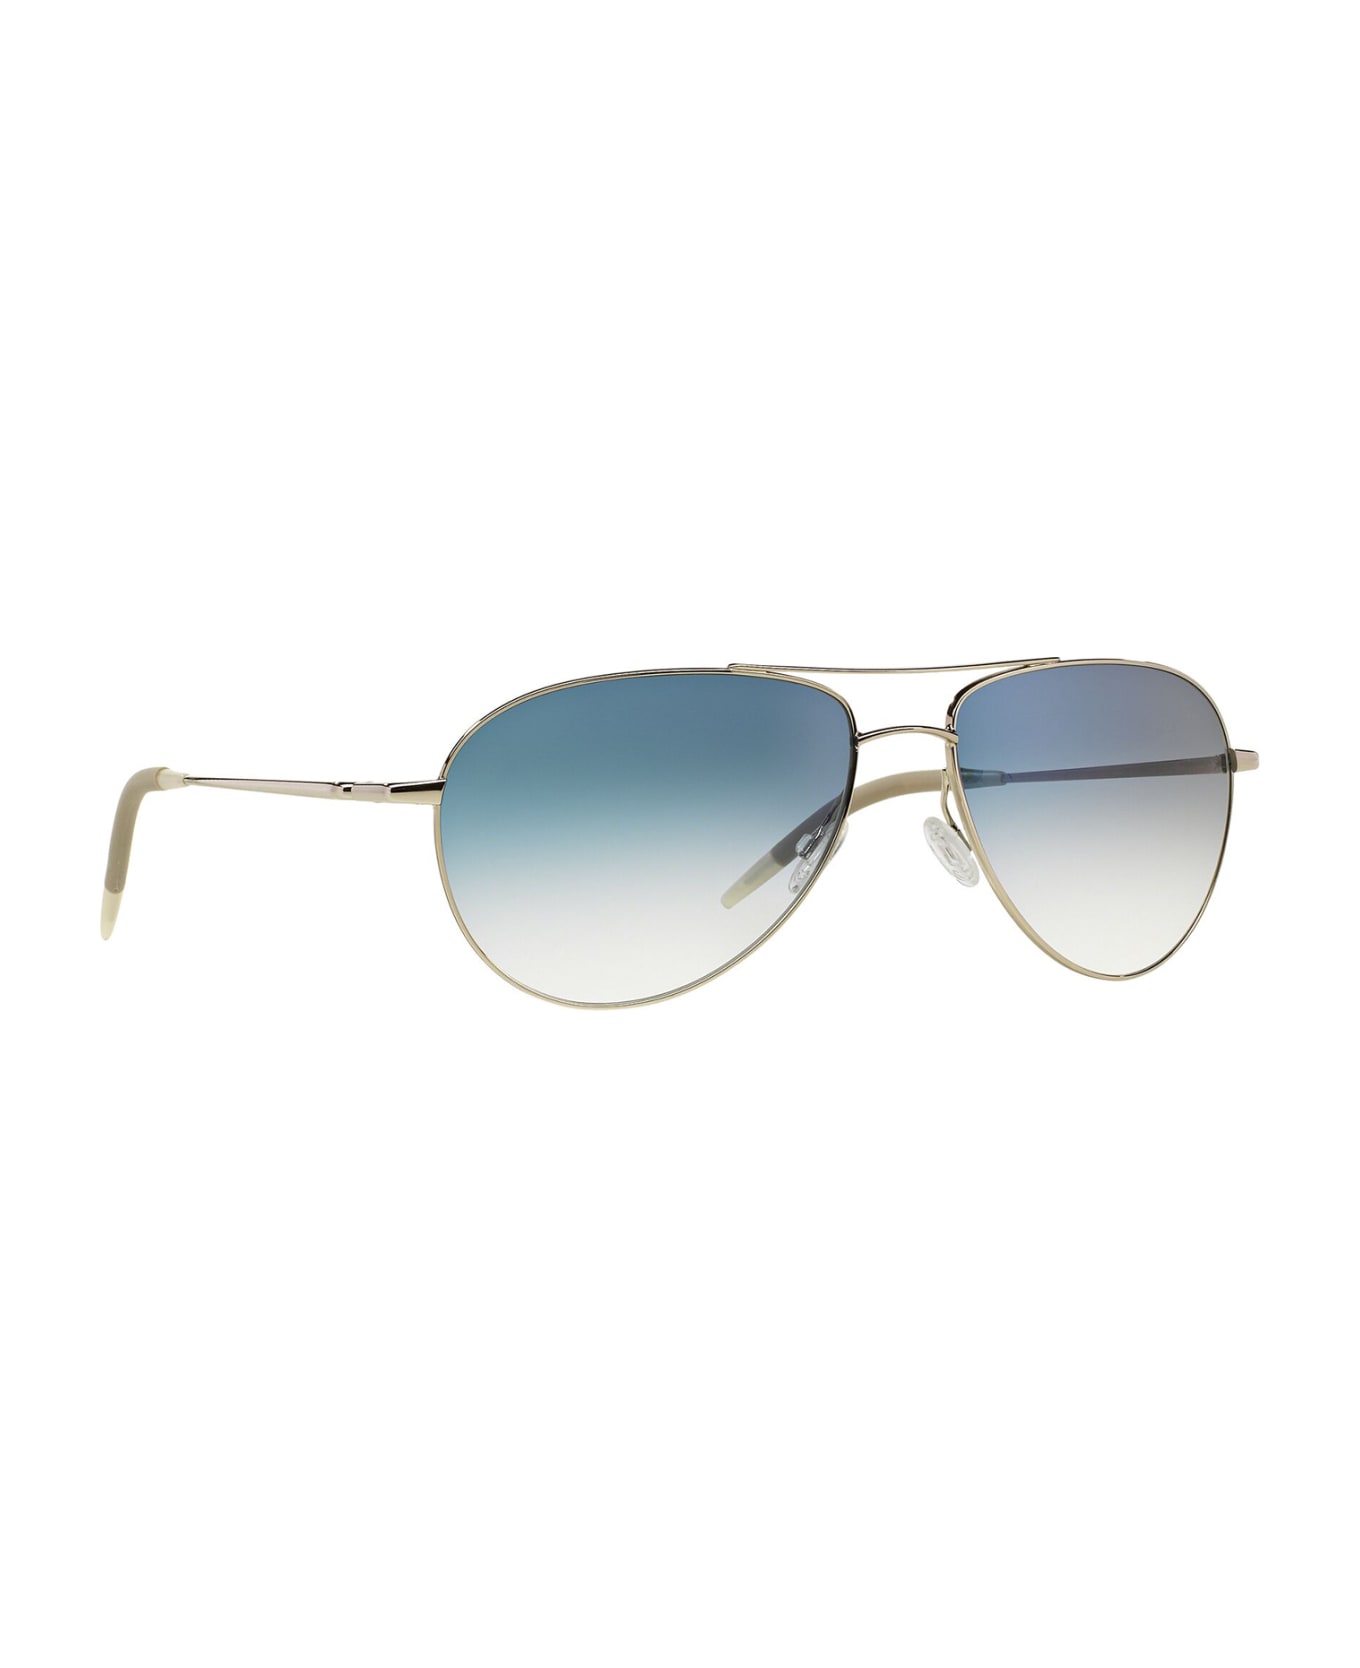 Oliver Peoples Ov1002s Silver Sunglasses - Silver